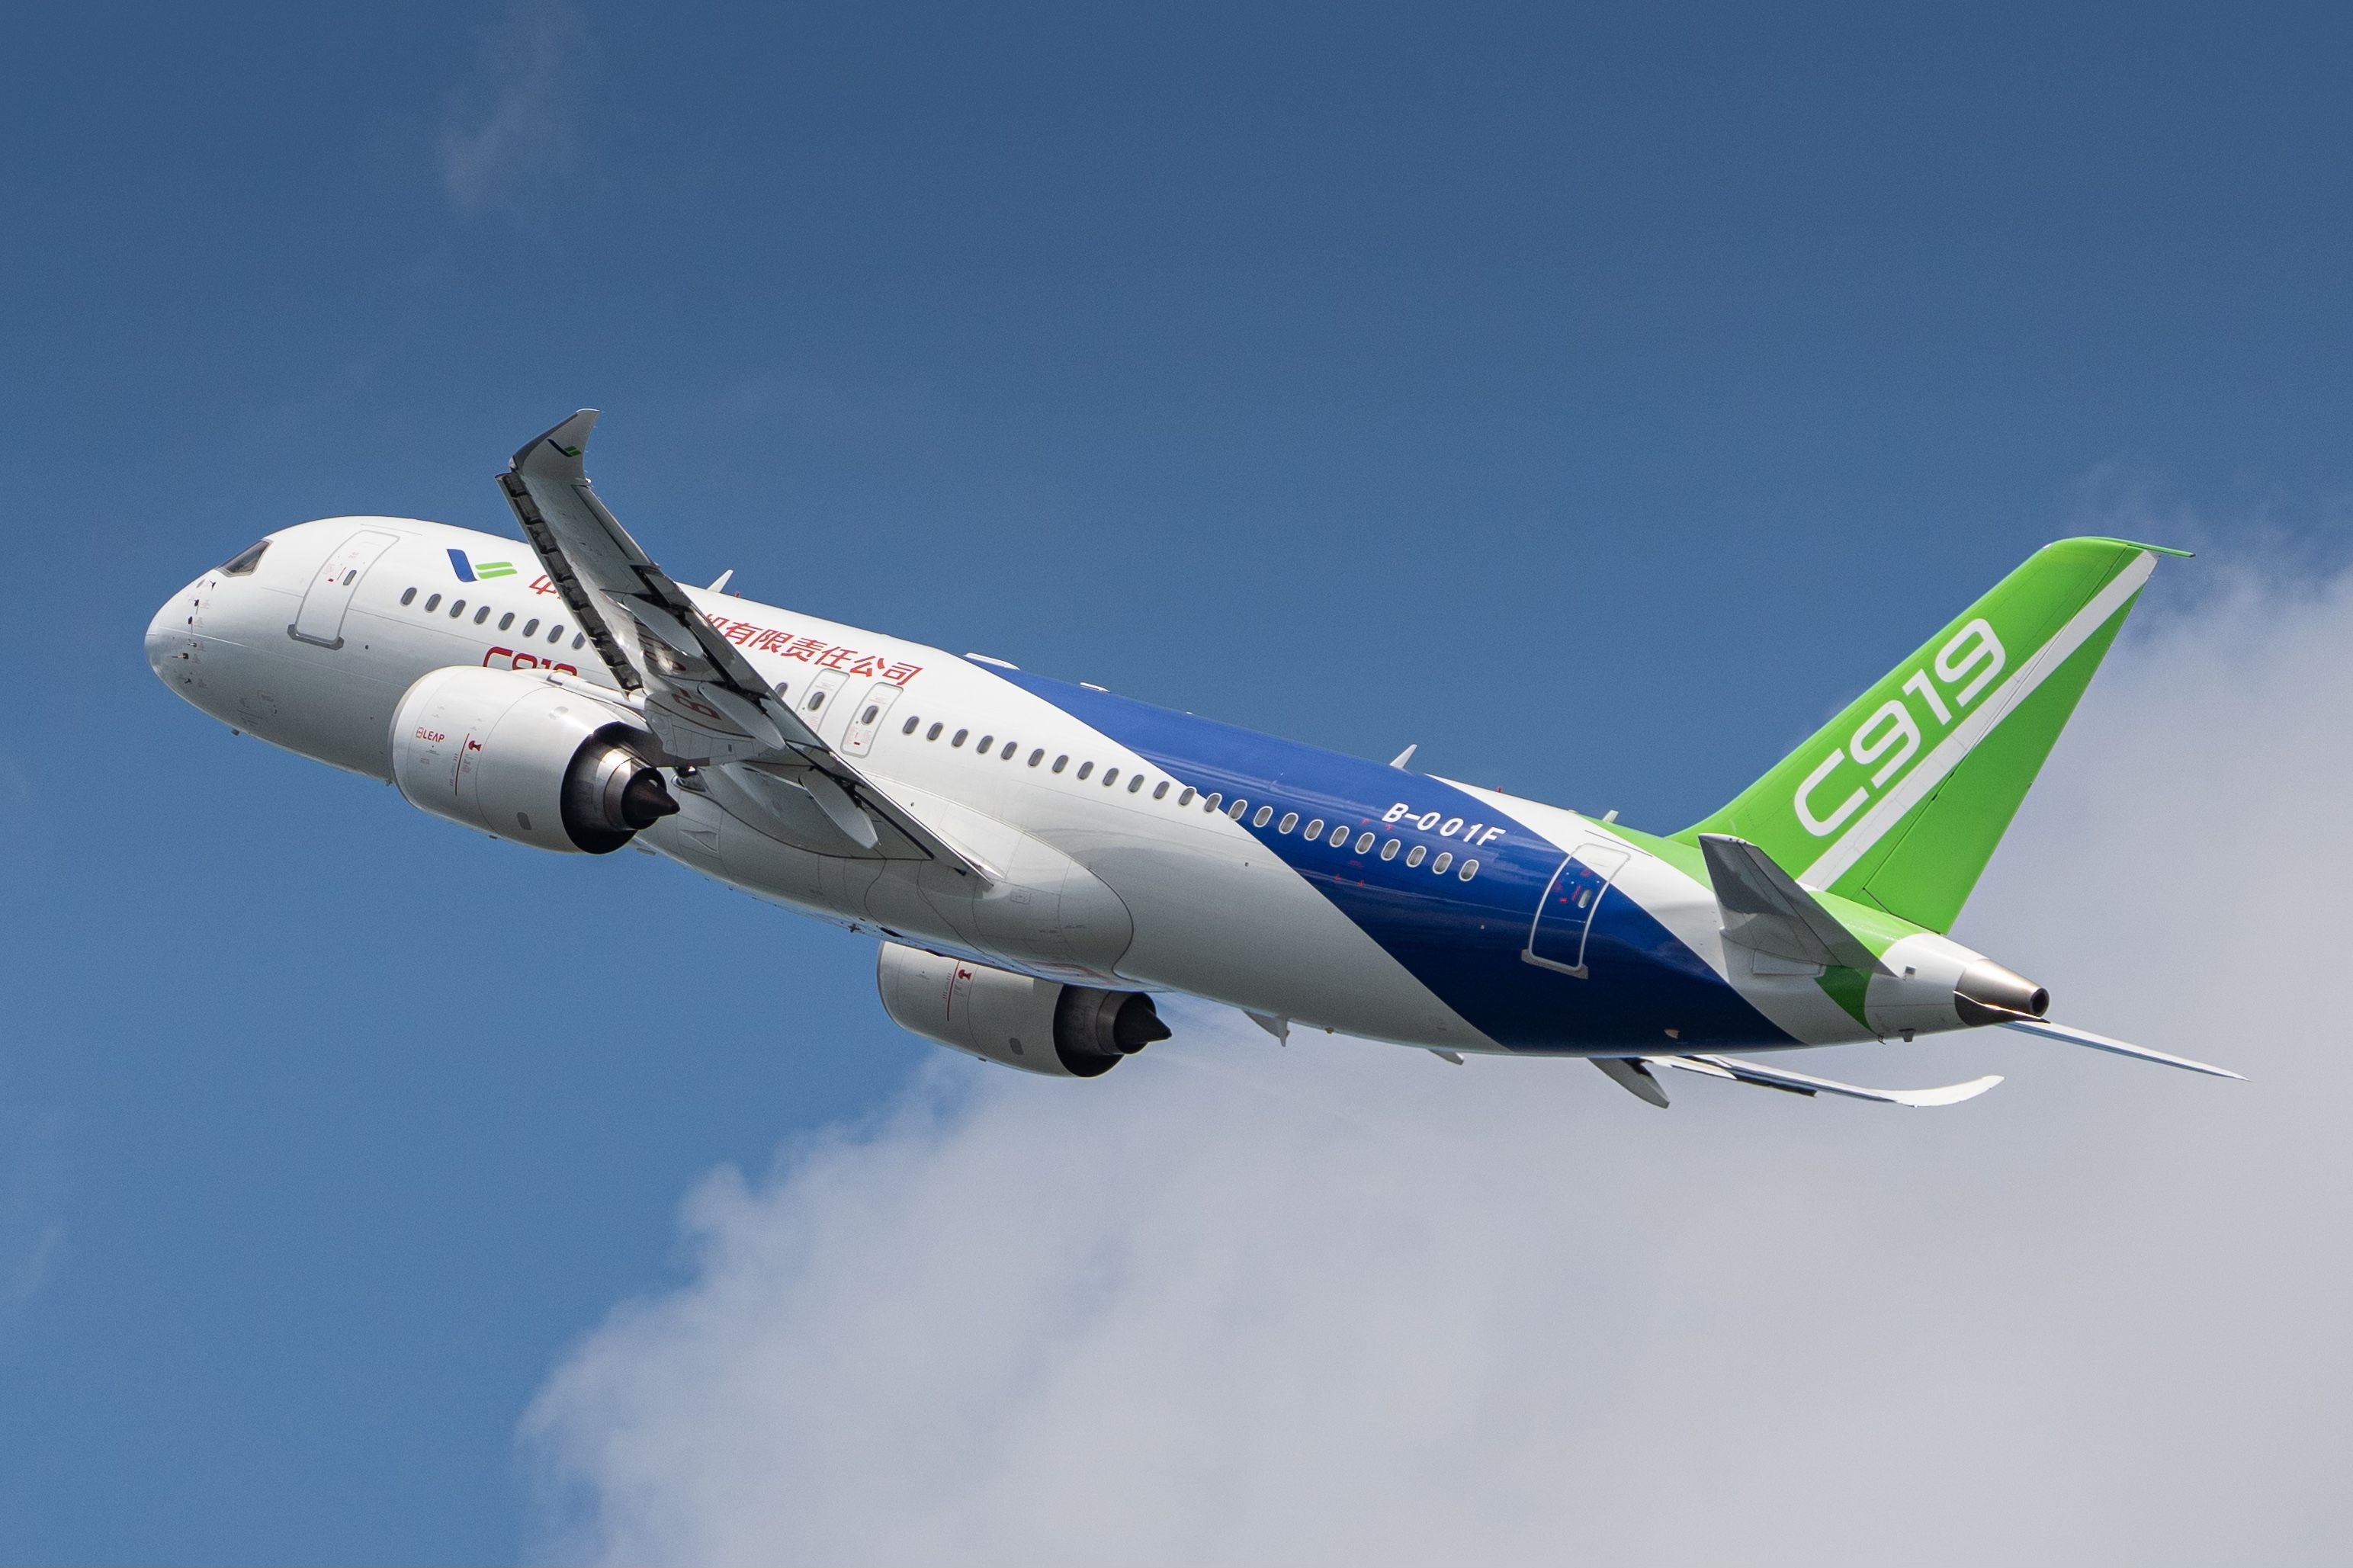 Comac C919 in house colours in flight